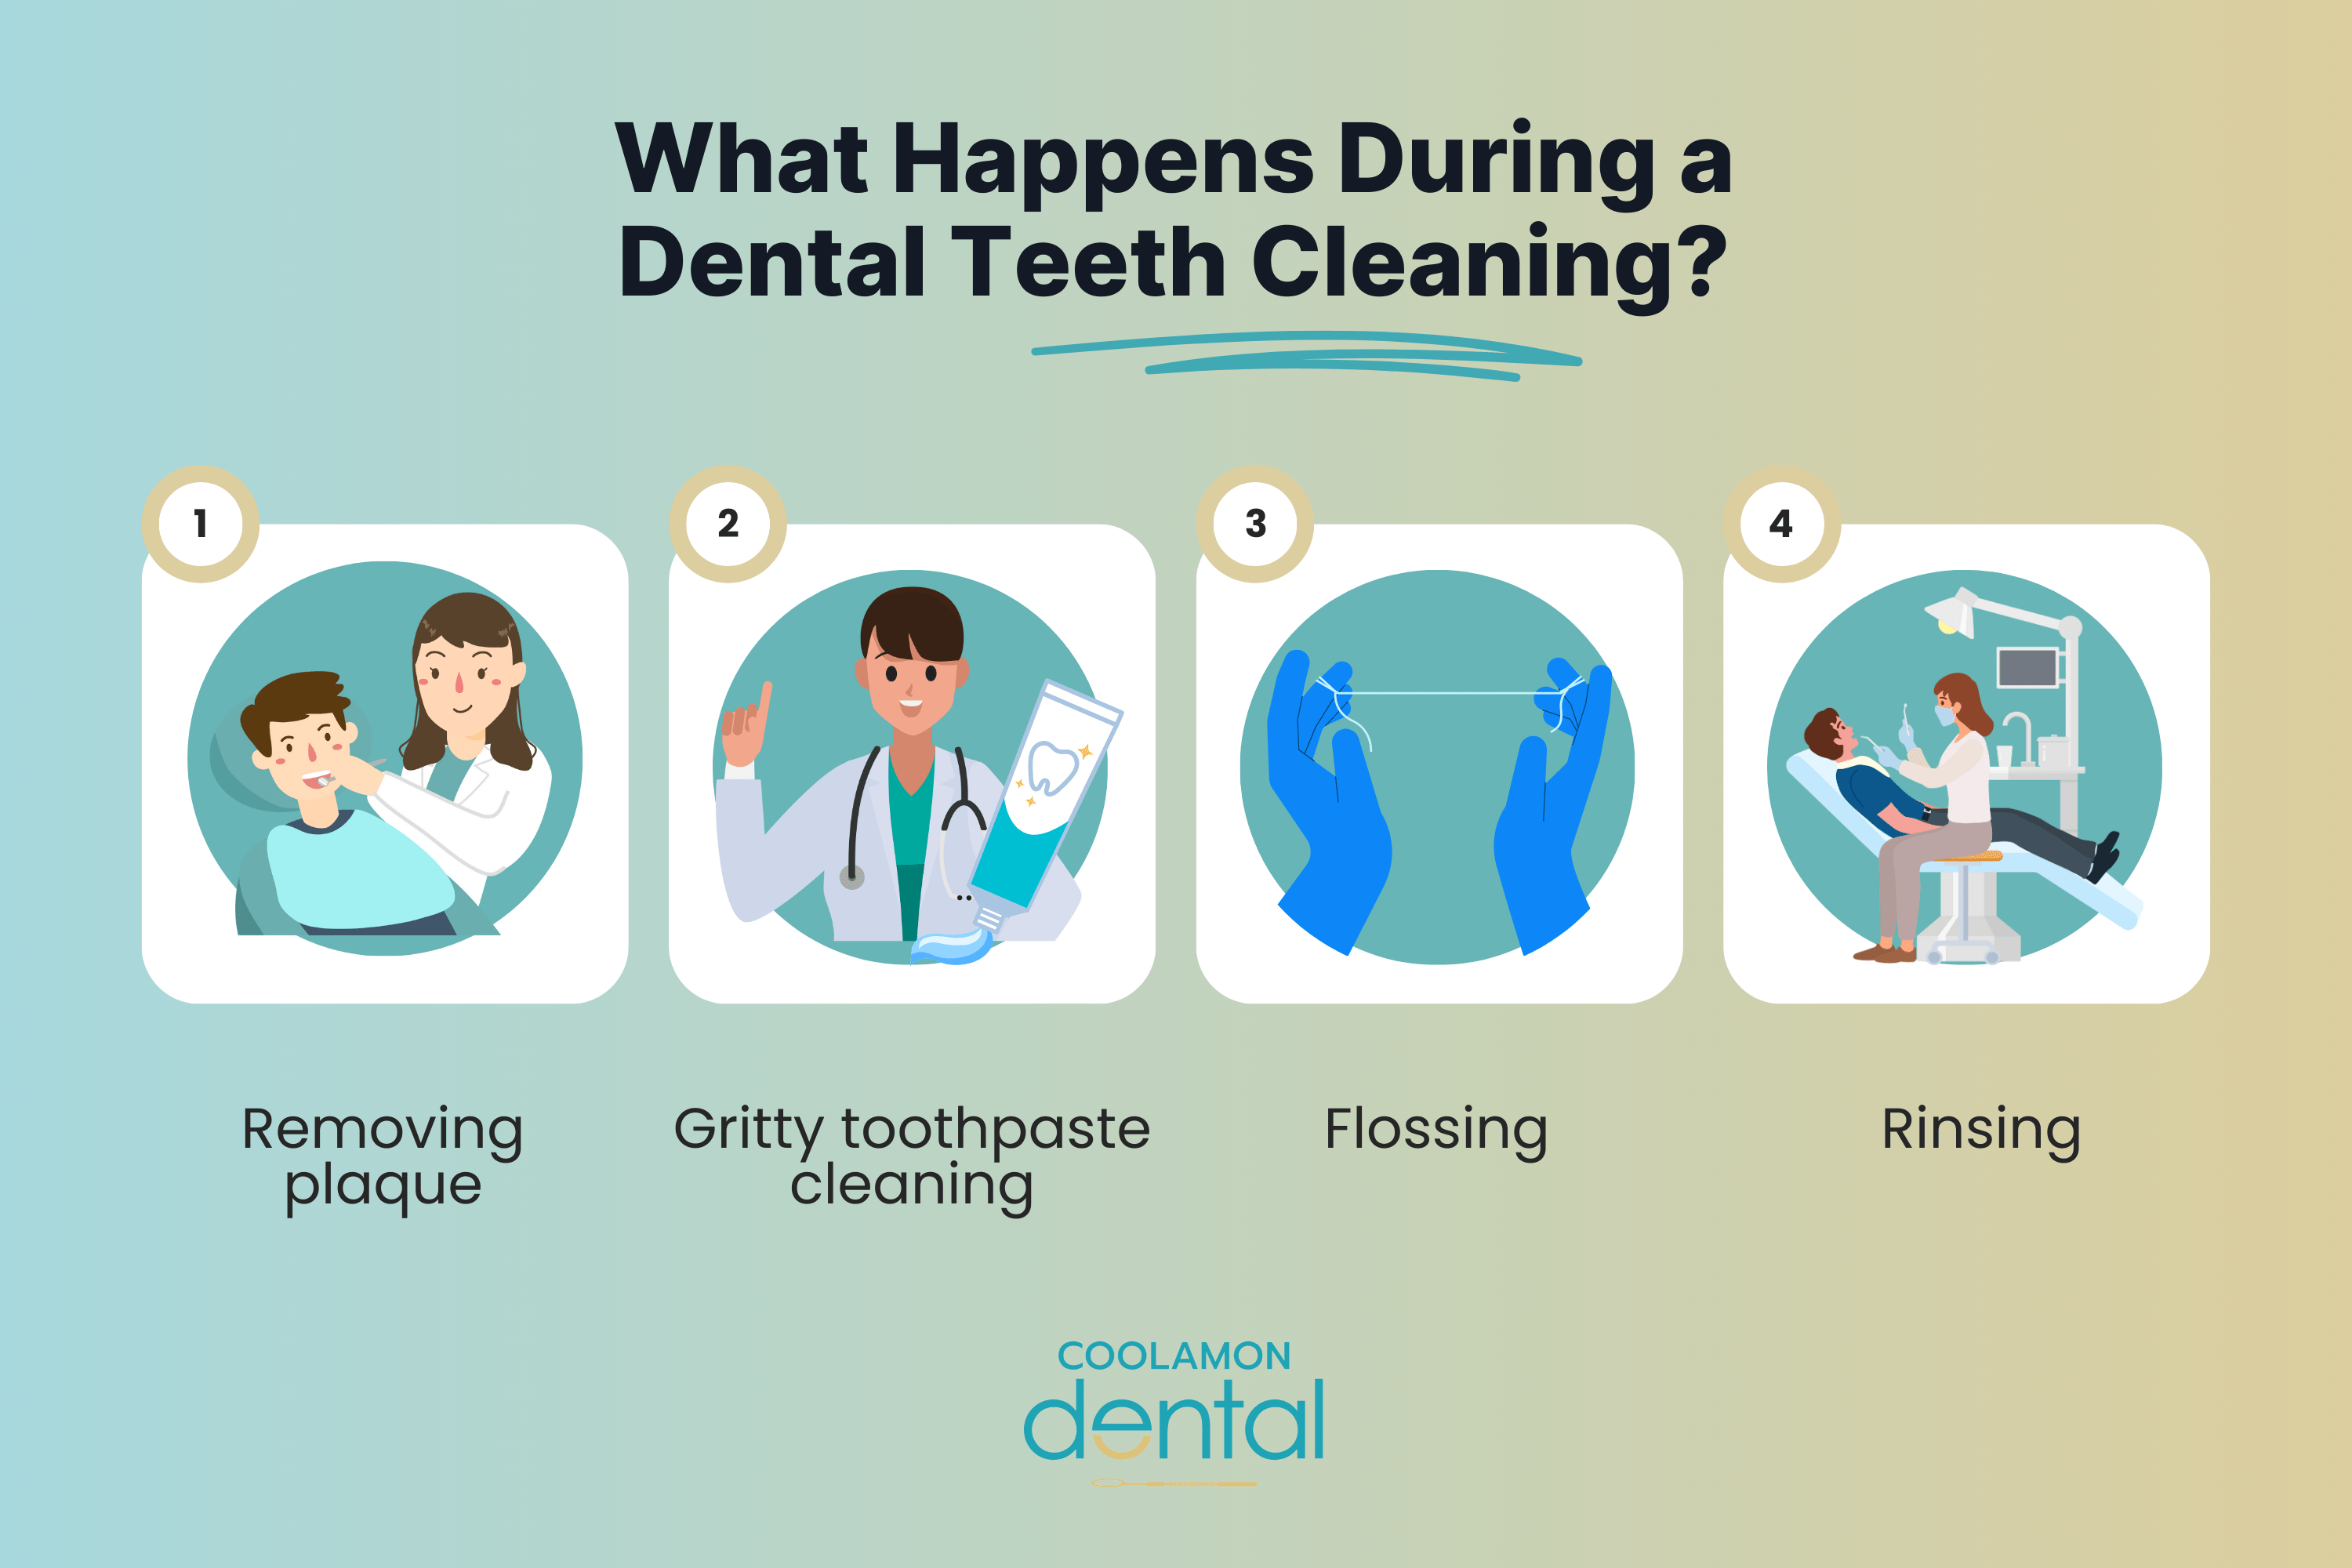 What Happens During a Dental Teeth Cleaning